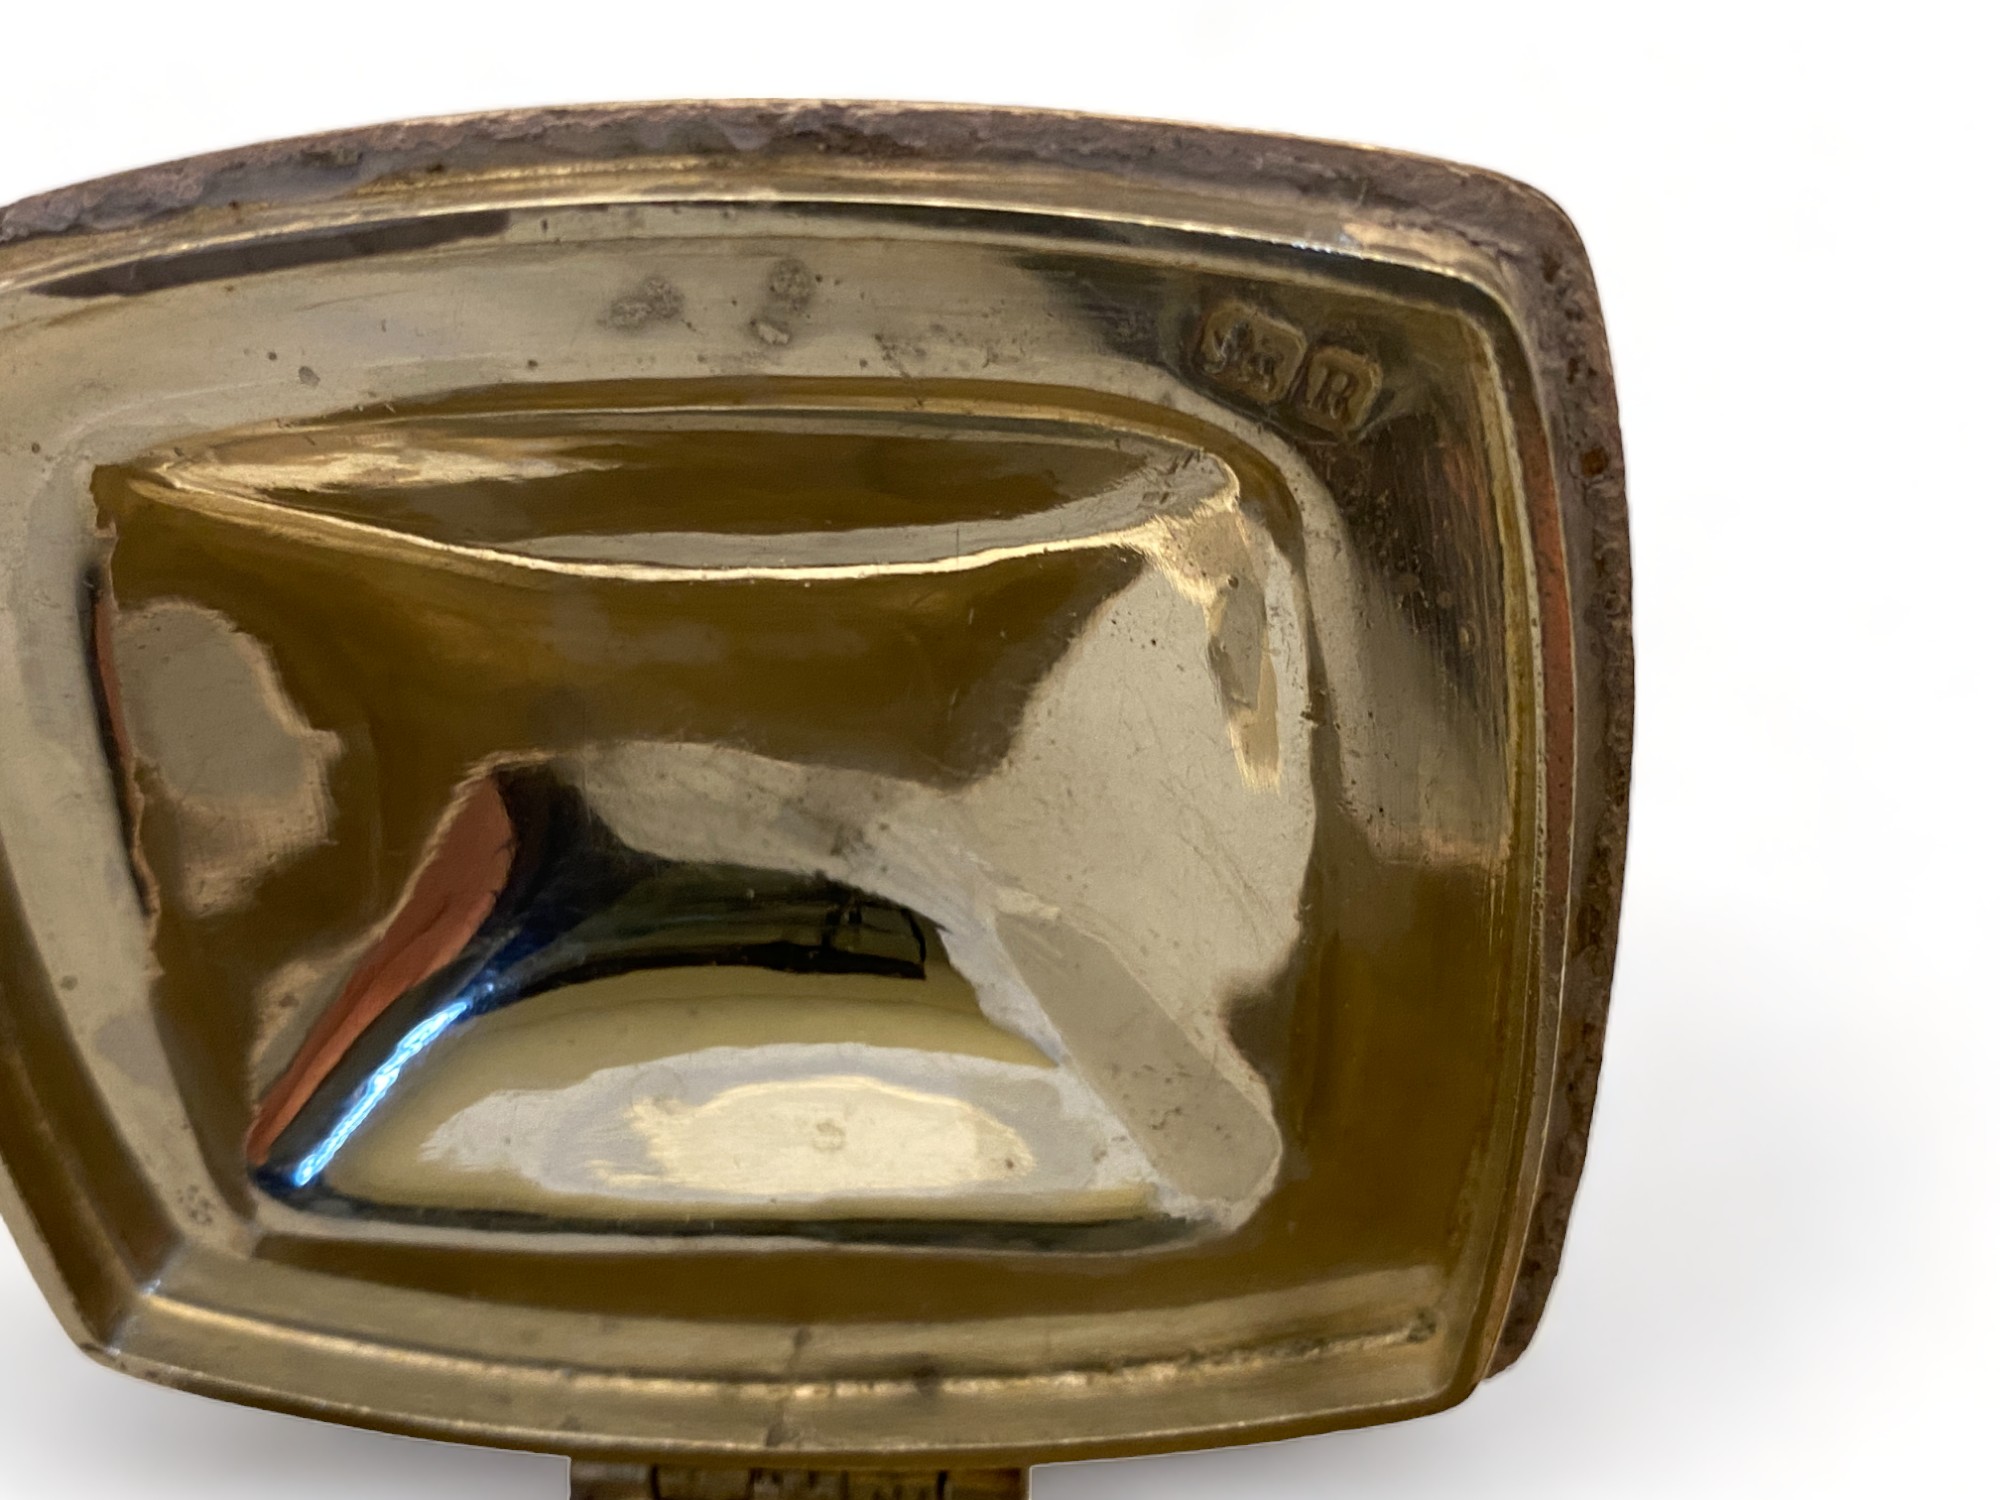 A silver Georgian style tea caddy, William Aitken, Chester, 1900 - Image 6 of 8